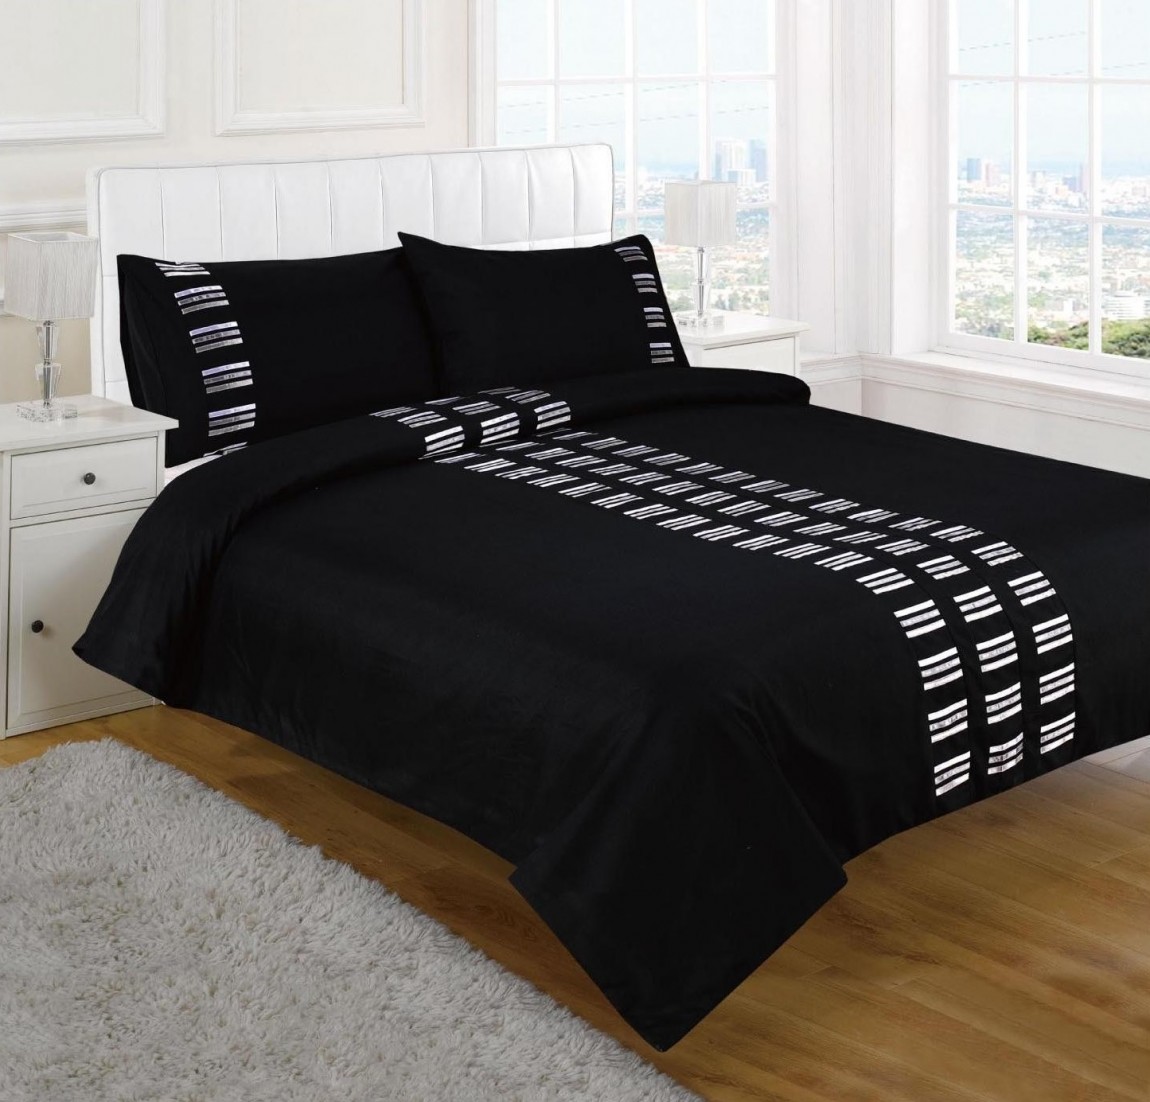 Black And Covers Terrific Black And White Duvet Covers In Renzo Cushion Cover Black Installed With White Nightstand And White Table Lamp On Wooden Floor Bedroom  Cozy Black And White Duvet Covers Collection For Comfortable Bedrooms